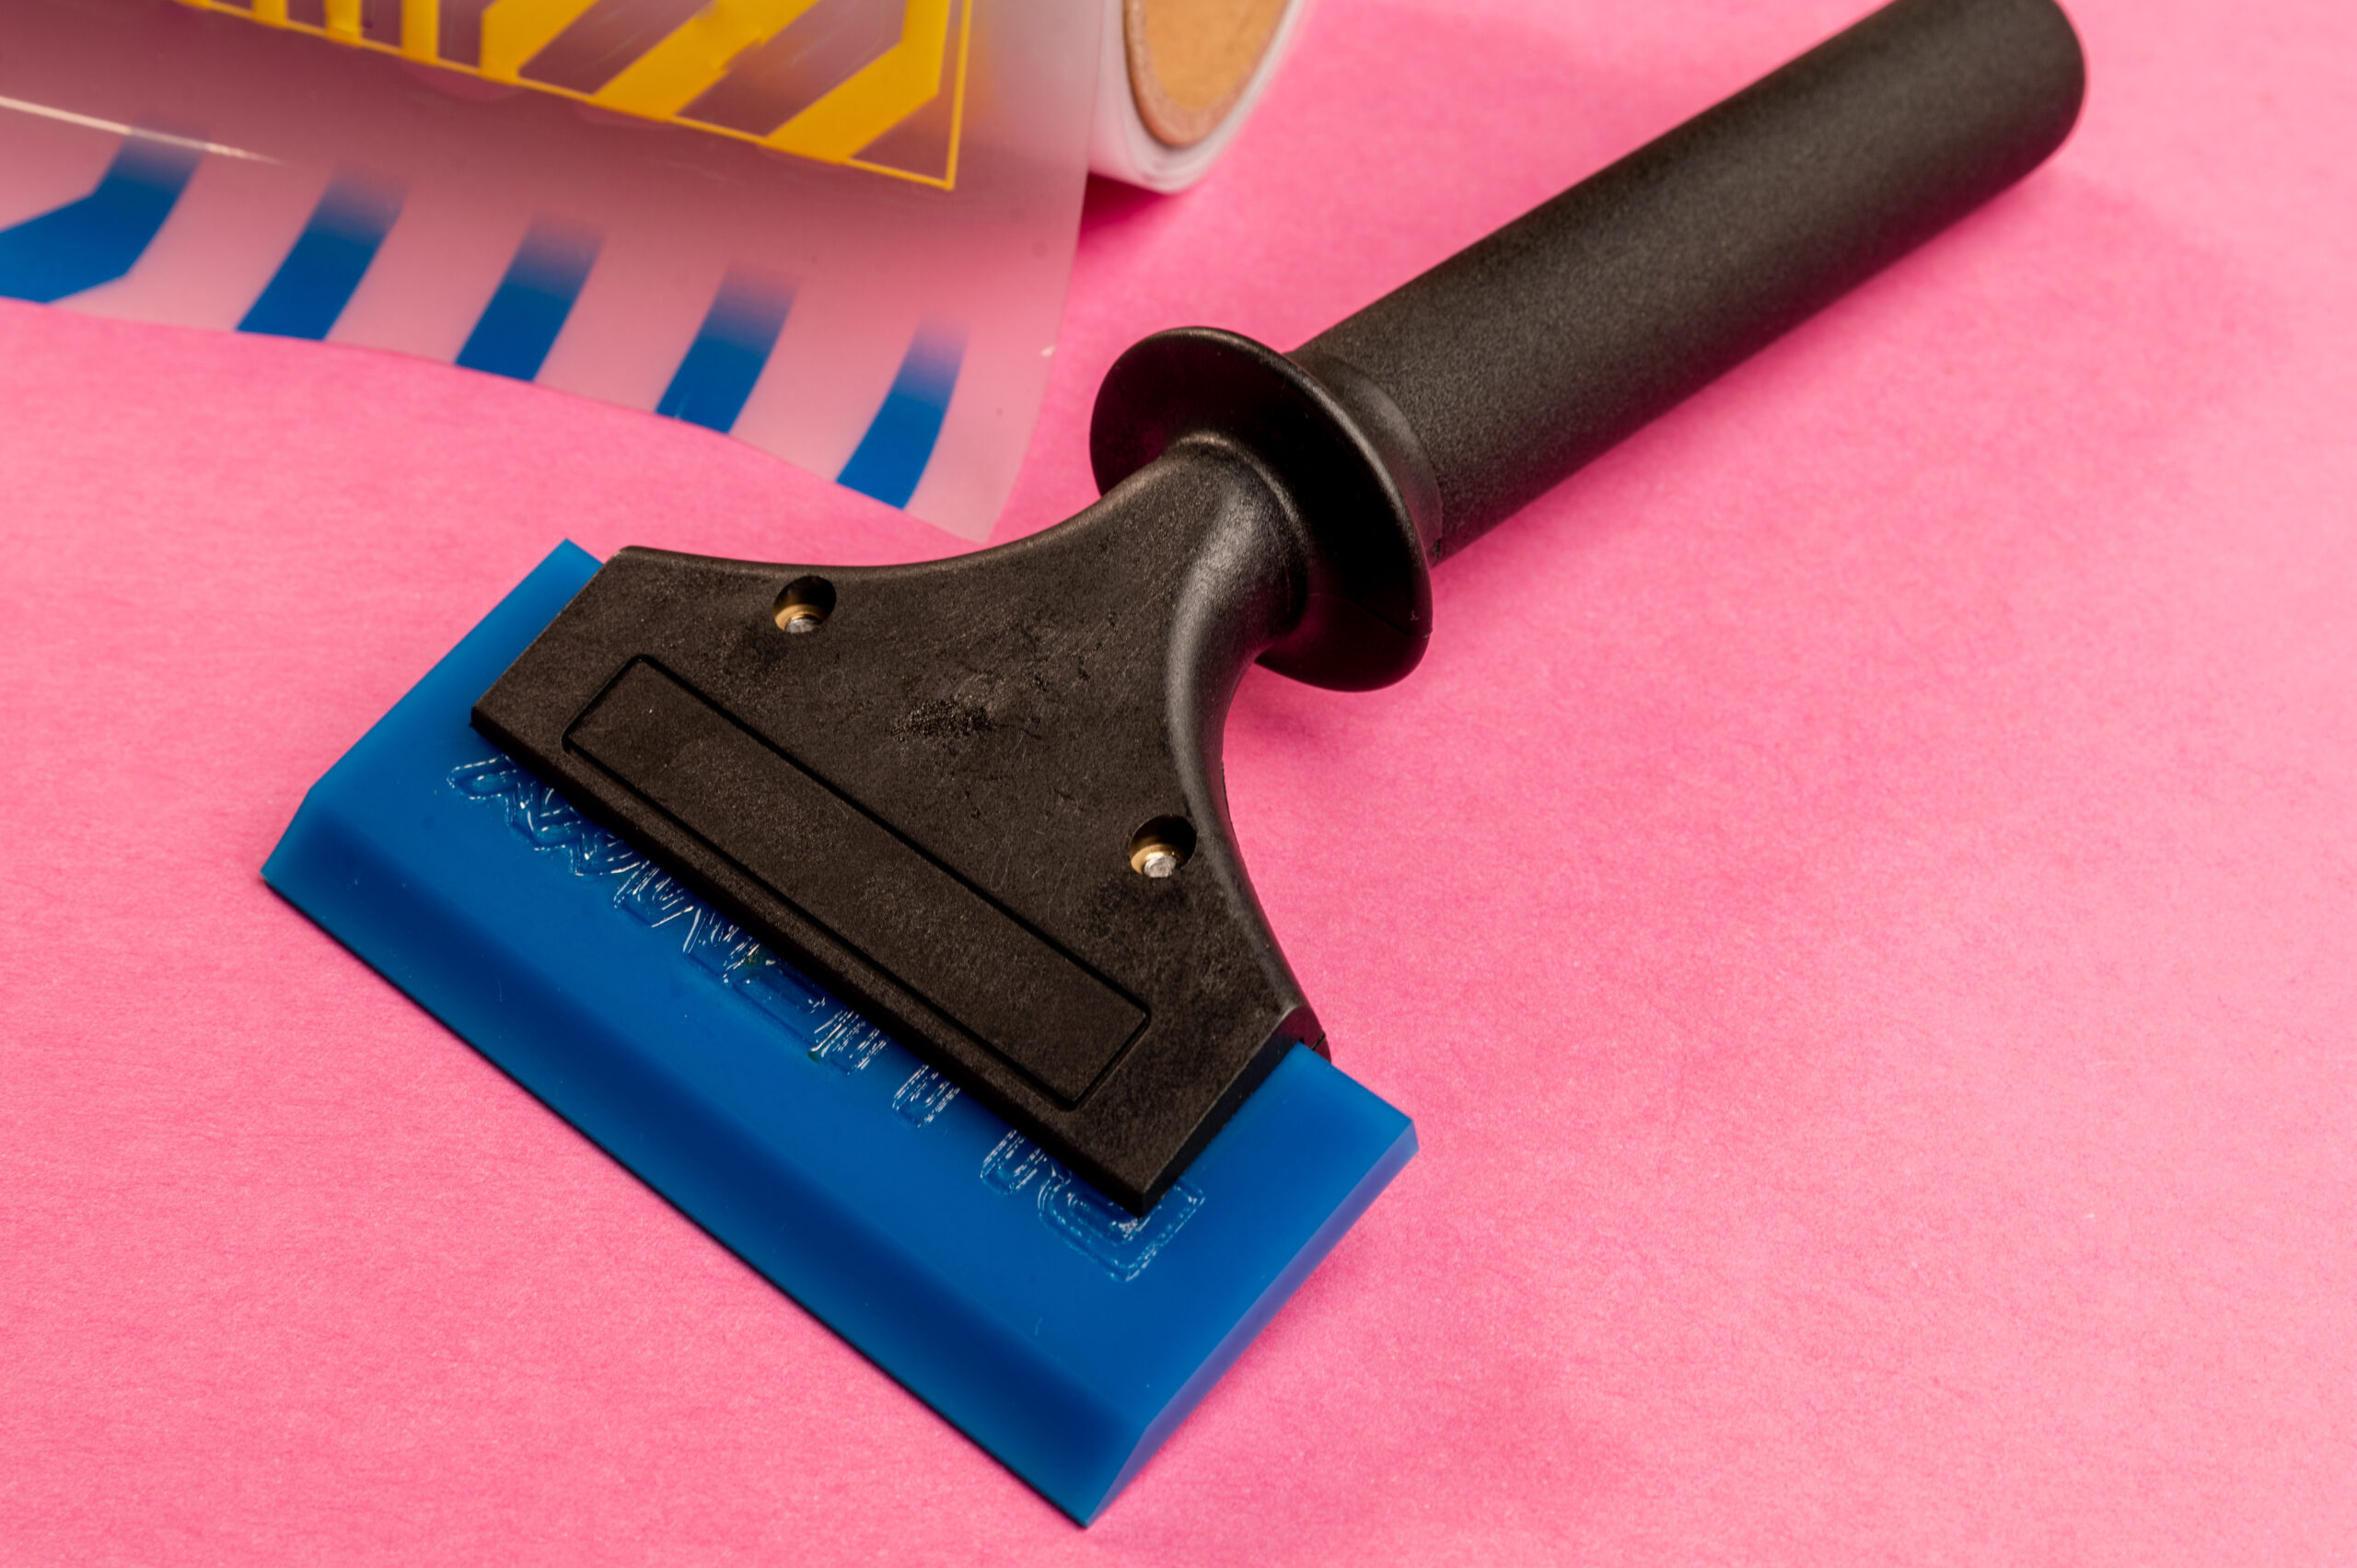 Performax Handle with Bluemax Squeegee Blade